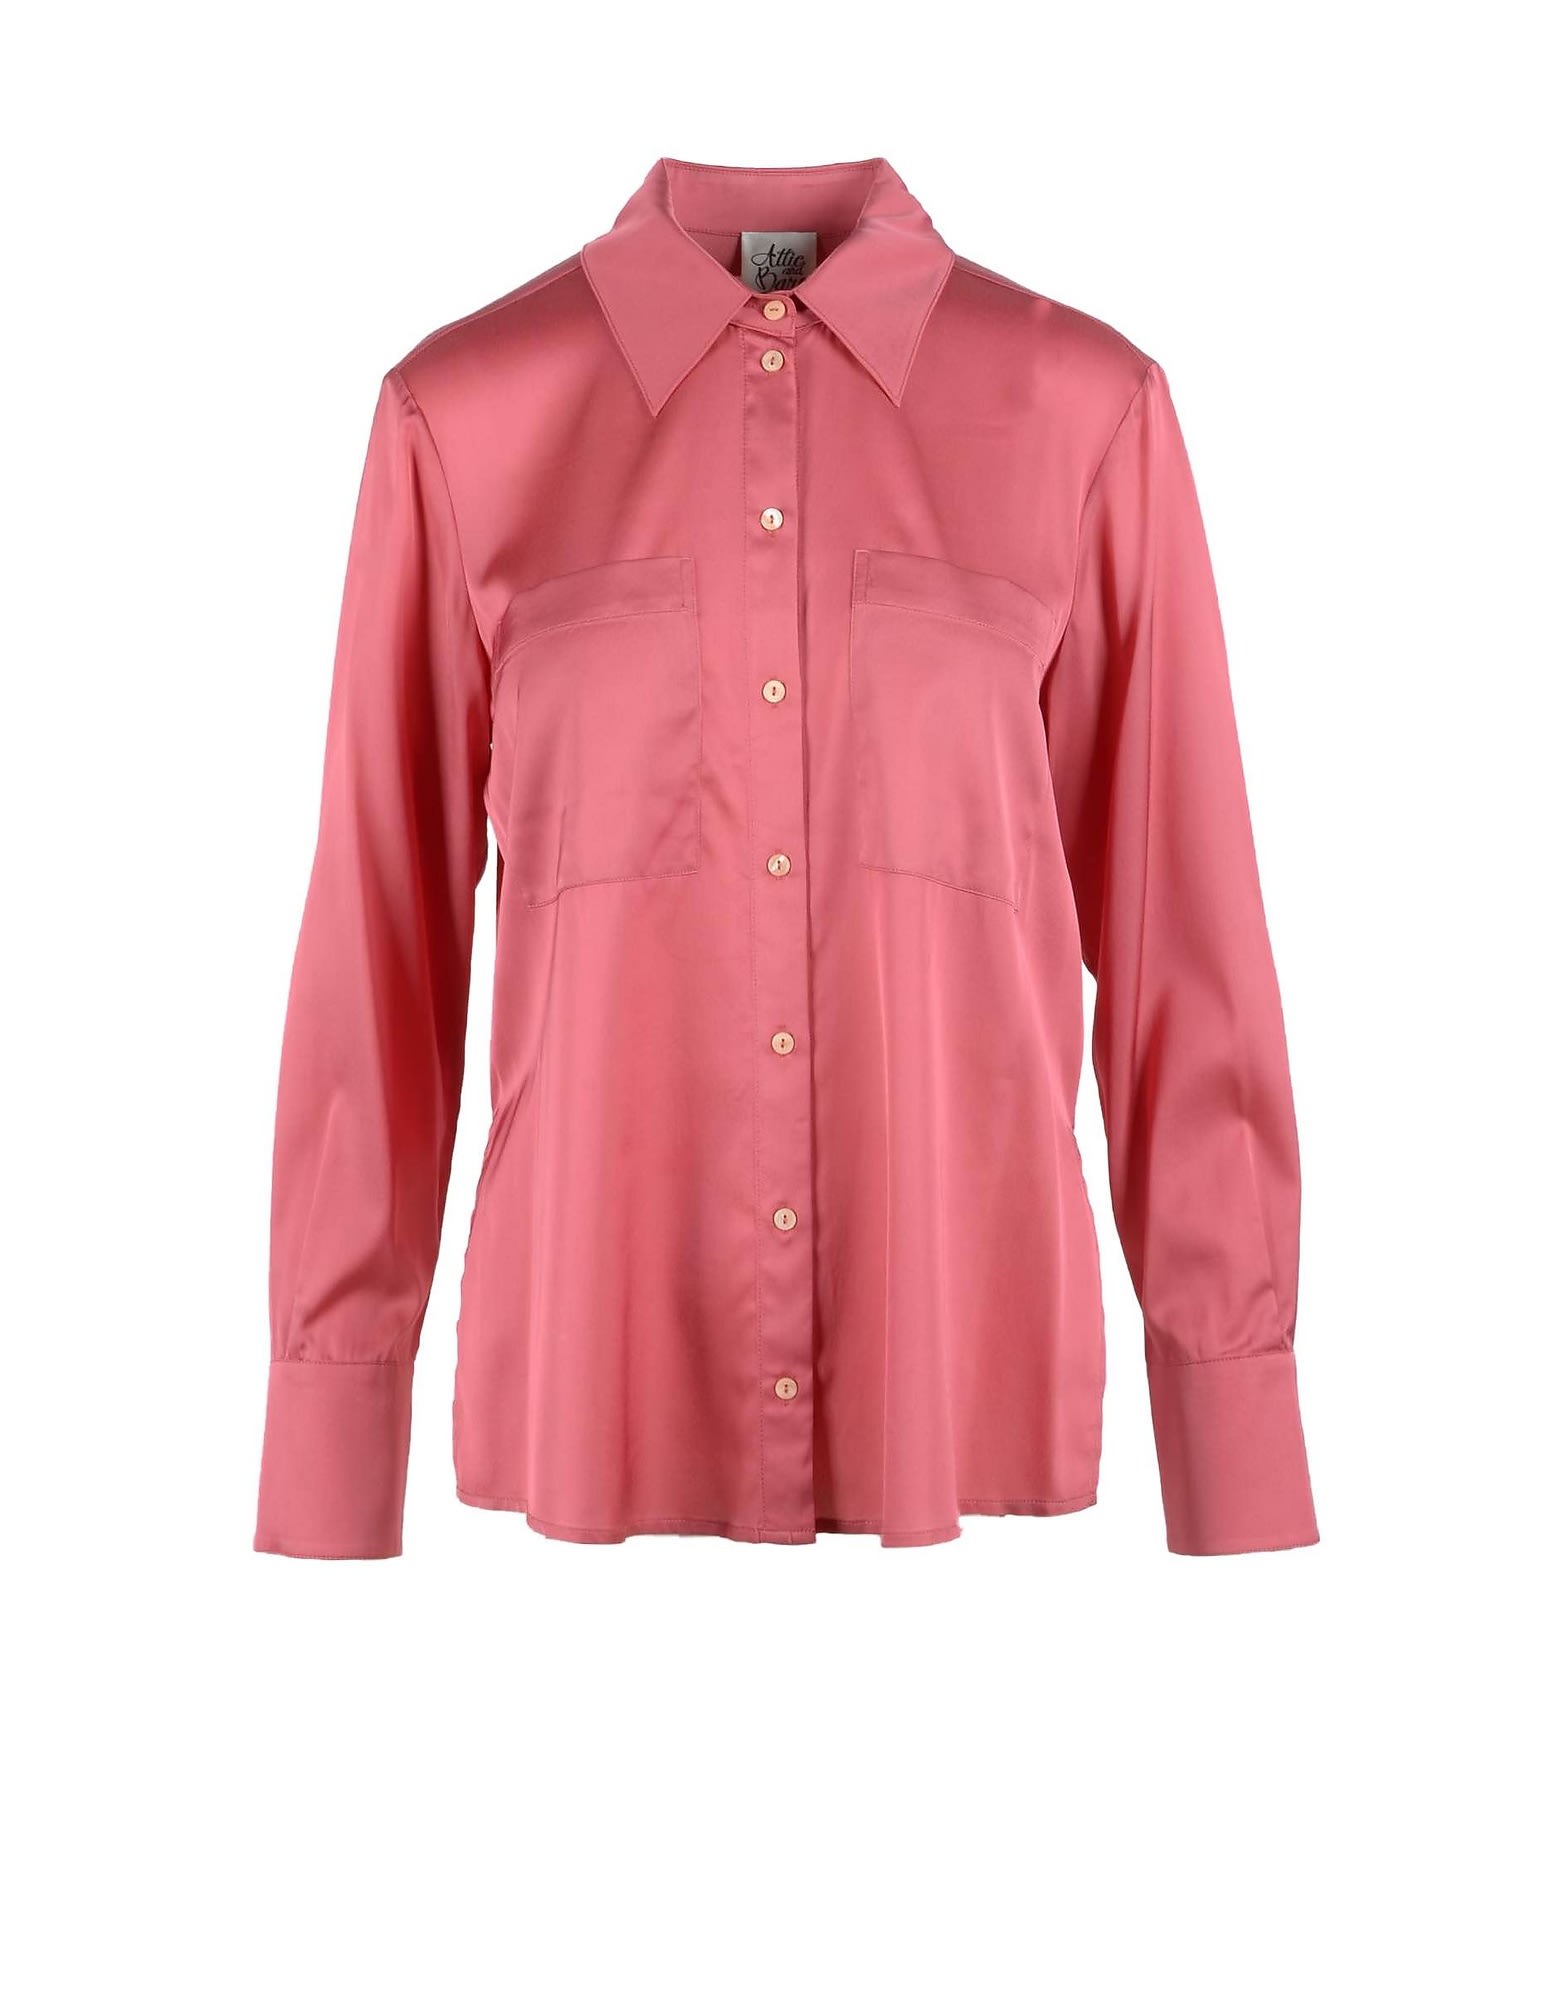 Attic and Barn Womens Strawberry Red Shirt